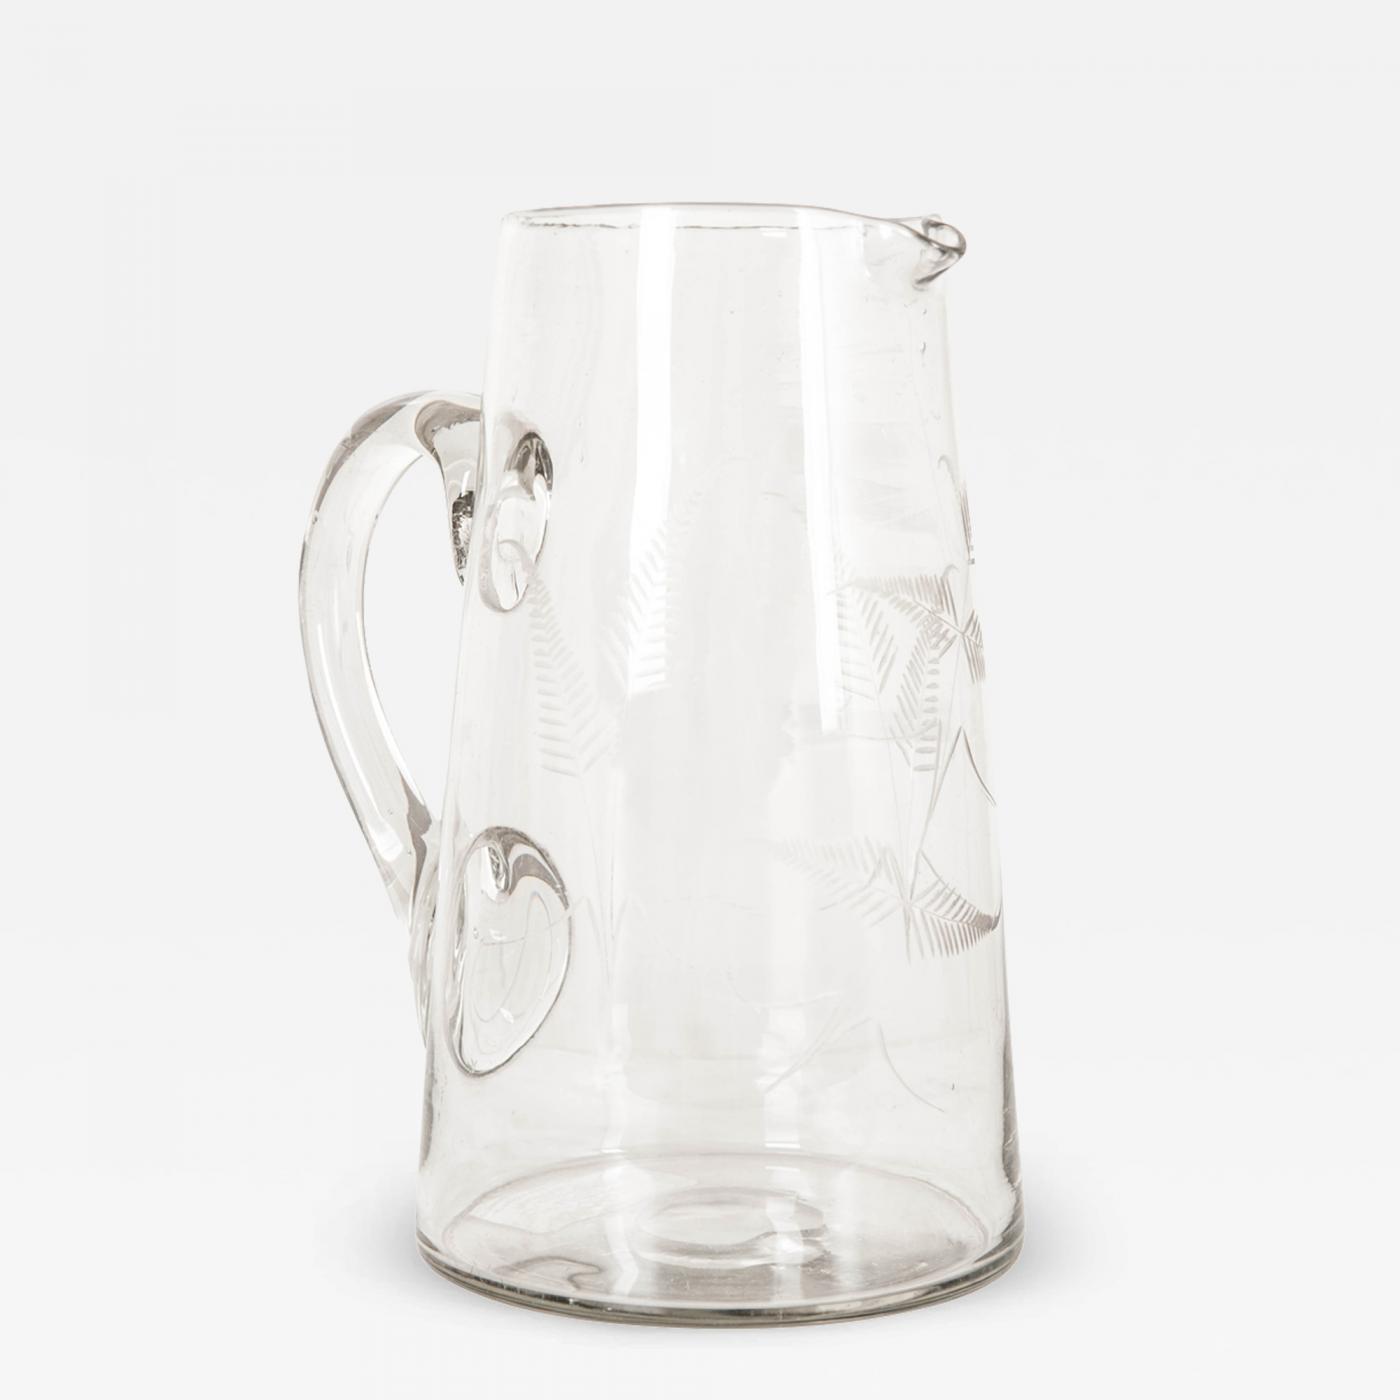 https://cdn.incollect.com/sites/default/files/zoom/French-19th-Century-Hand-Blown-Glass-Pitcher-339347-1216350.jpg